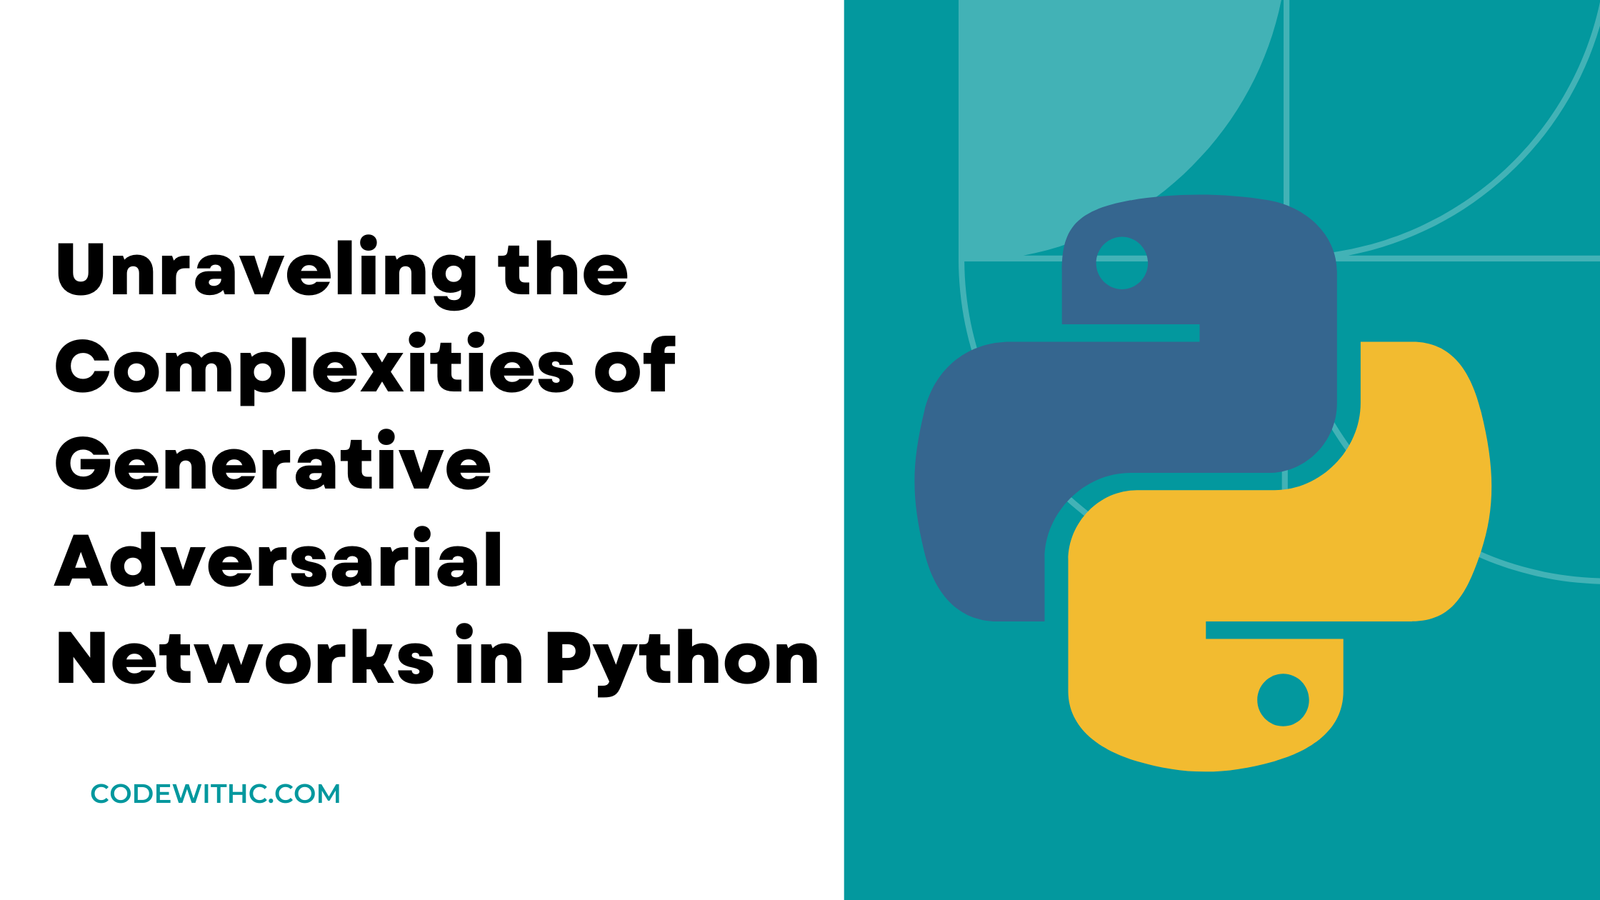 Unraveling the Complexities of Generative Adversarial Networks in Python